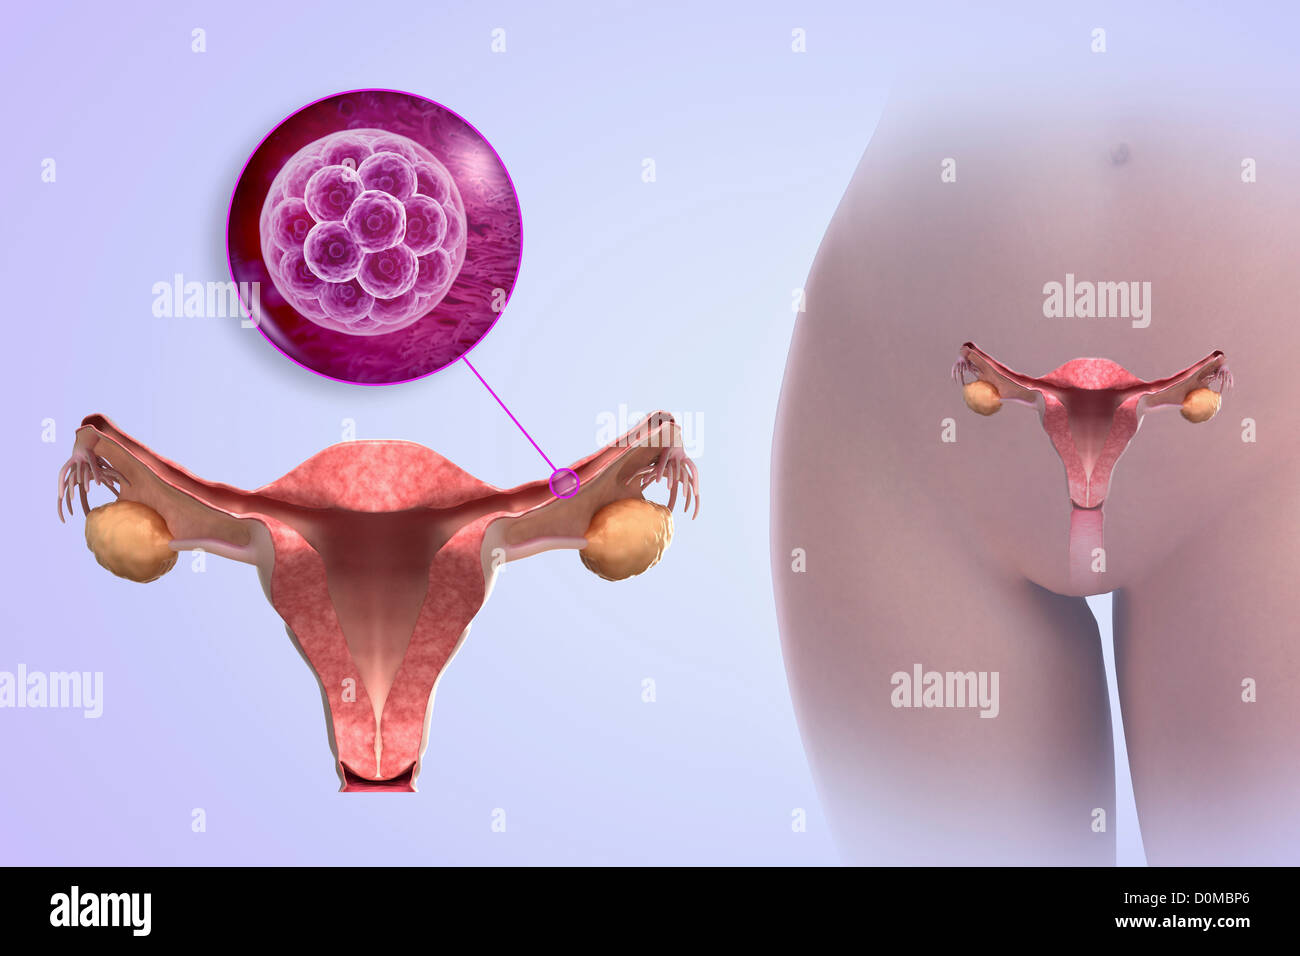 A human model showing pregnancy between 4-6 days. Stock Photo